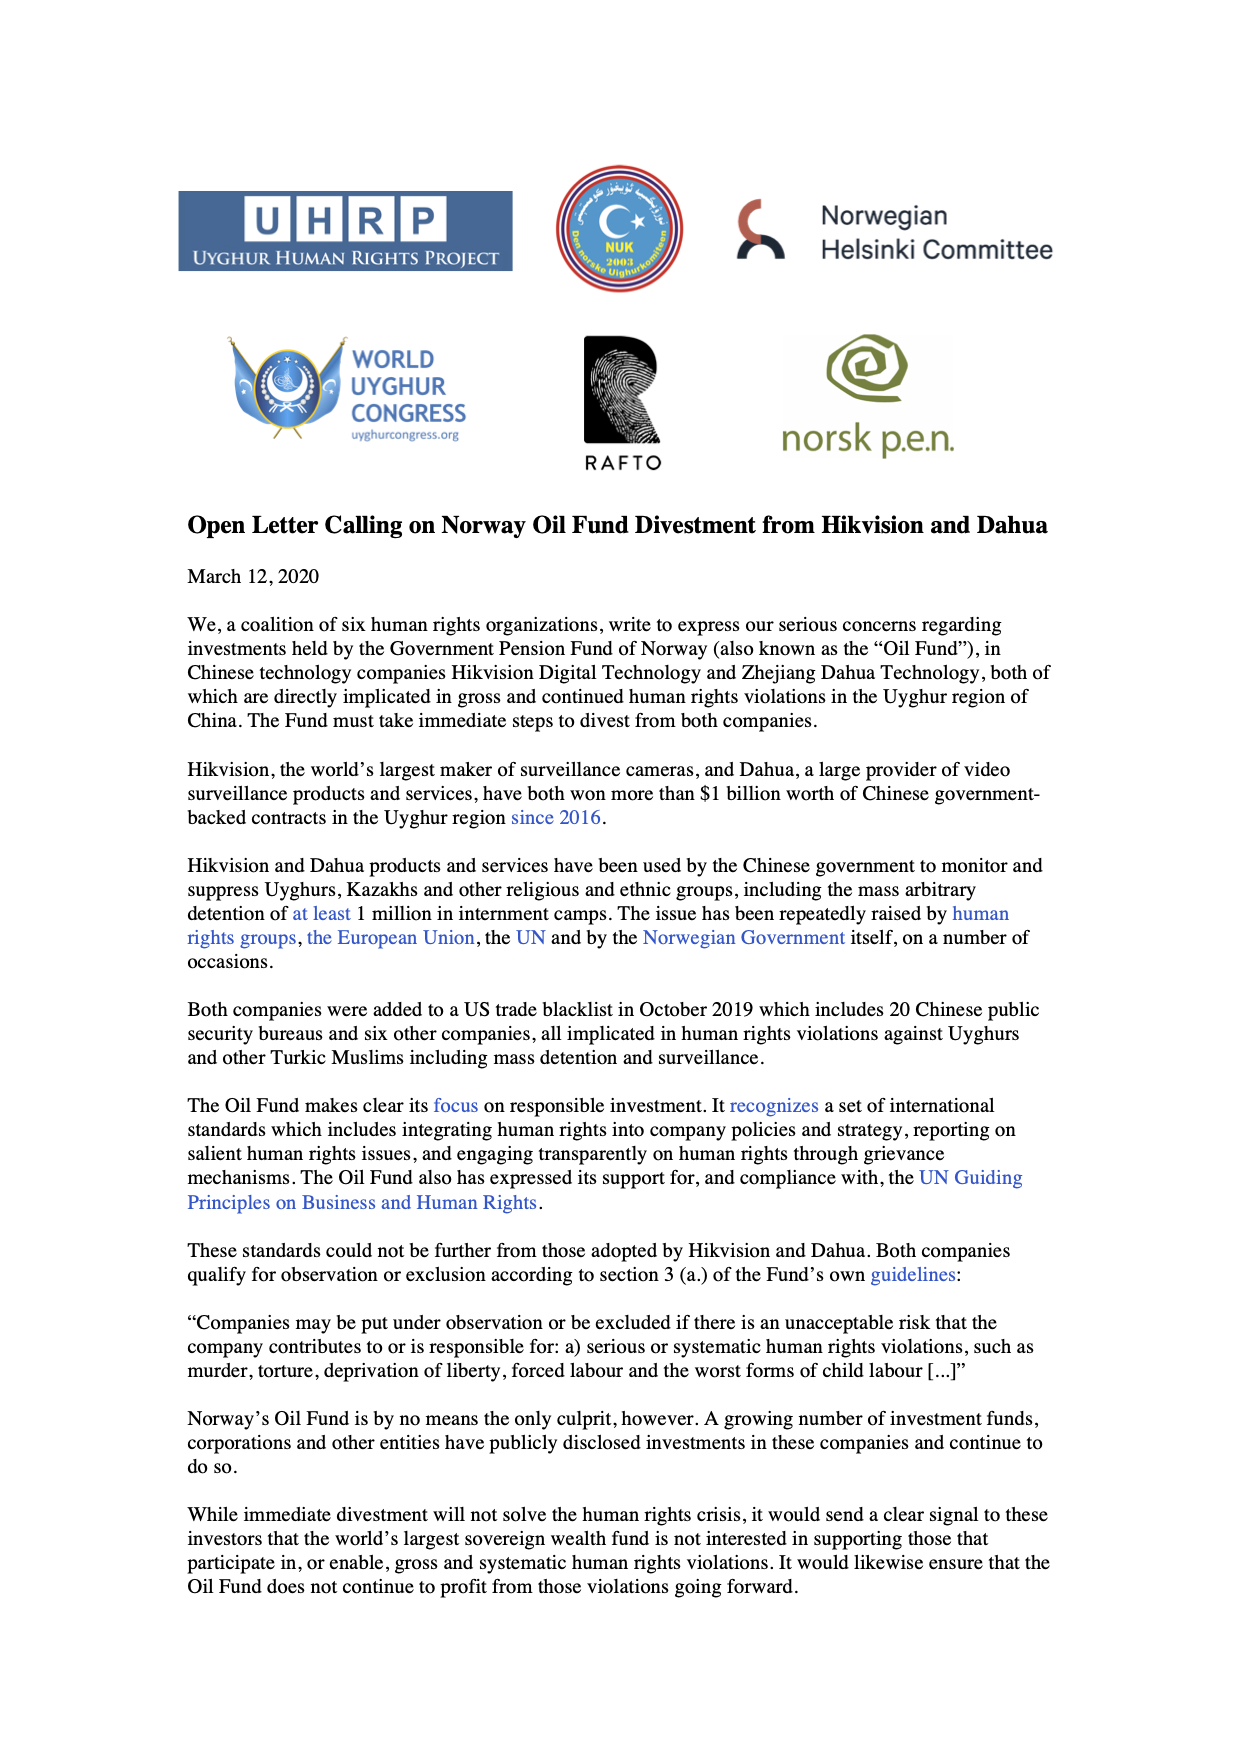 PRESS RELEASE: Coalition of NGOs Calls on Norway Oil Fund to Divest from Hikvision and Dahua